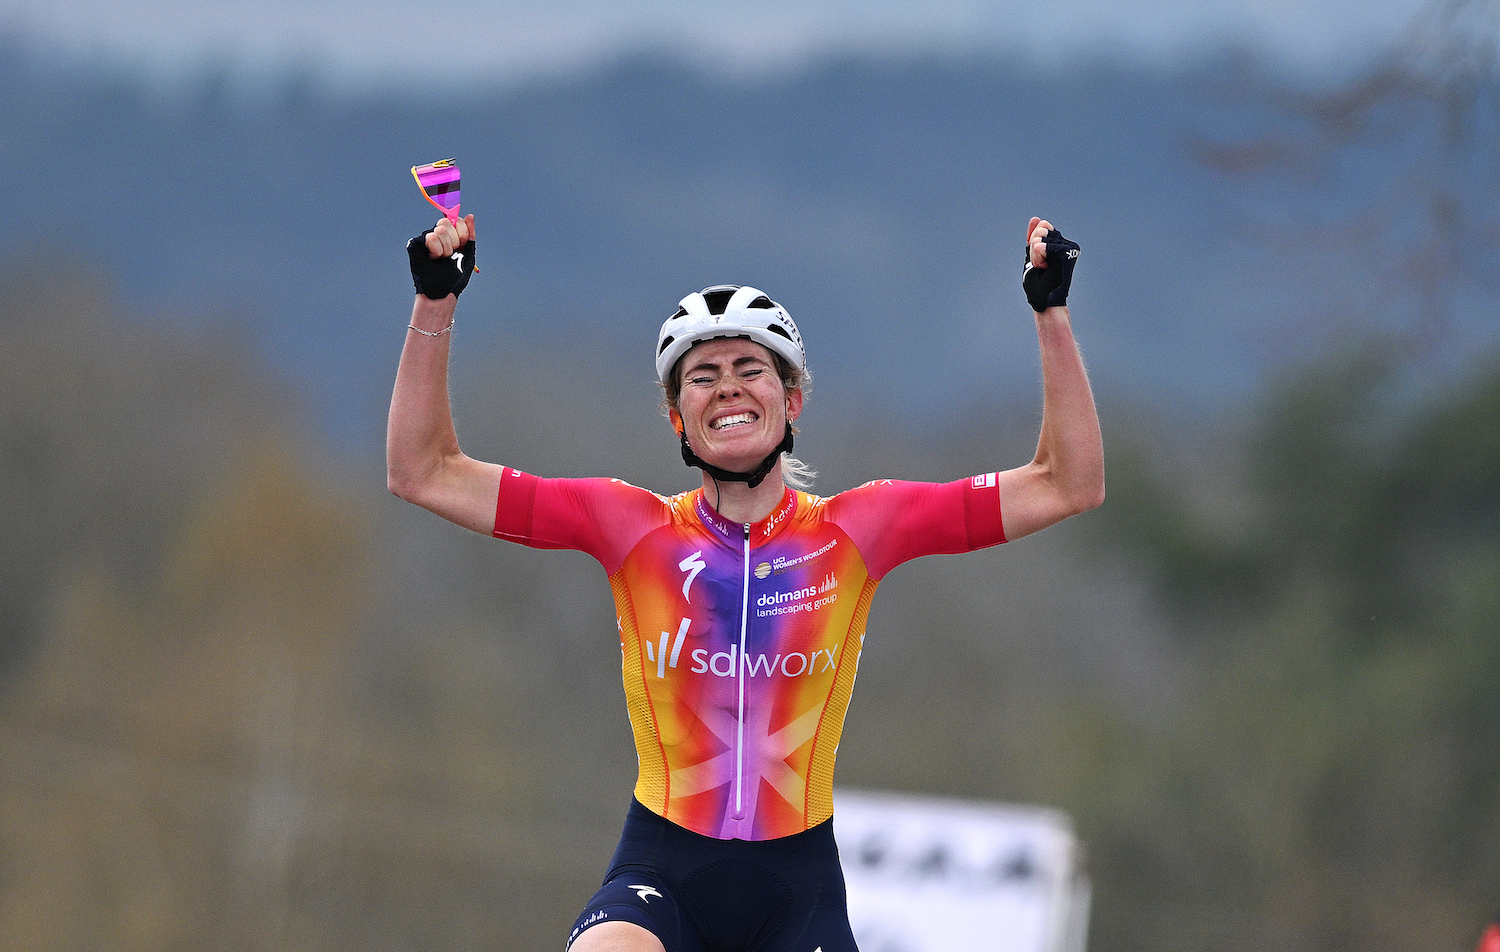 HUY, BELGIUM - APRIL 19: Demi Vollering of The Netherlands and Team SD Worx celebrates at finish line as race winner during the 26th La Fleche Wallonne Feminine 2023 a 127.3km one day race from Huy to Mur de Huy / #UCIWWT / on April 19, 2023 in Huy, Belgium. (Photo by David Stockman/Getty Images)